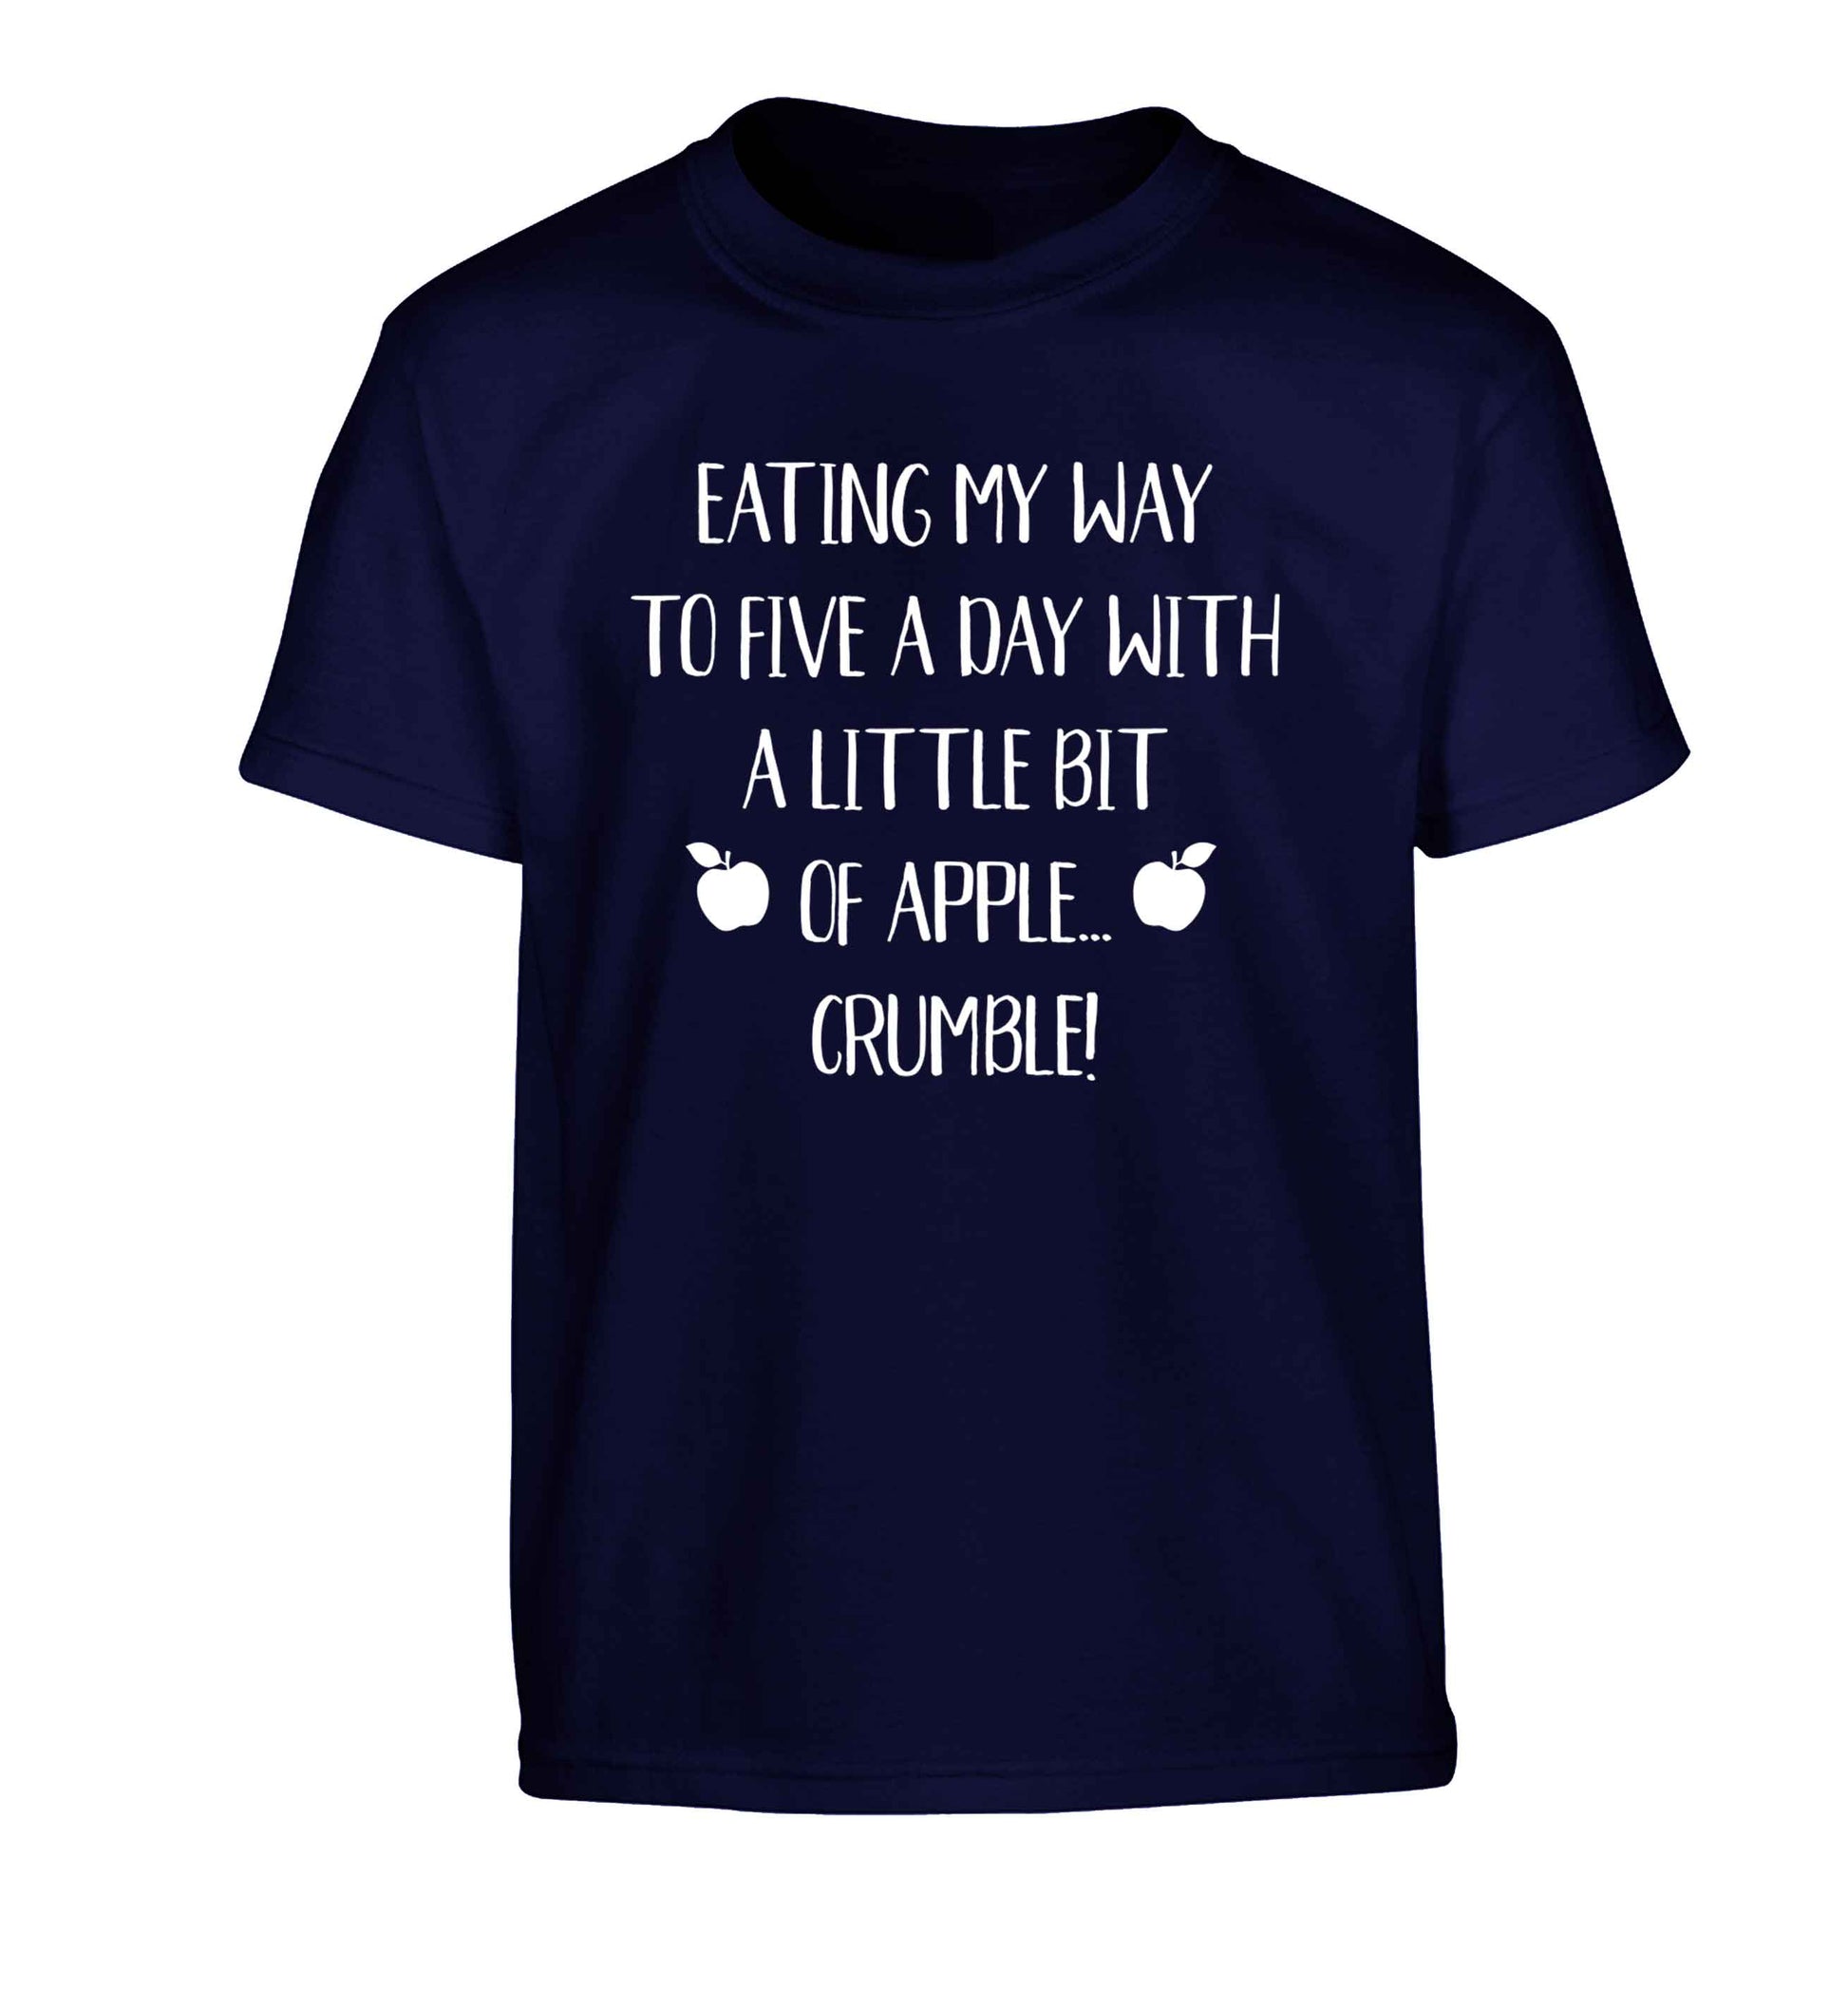 Eating my way to five a day with a little bit of apple crumble Children's navy Tshirt 12-13 Years